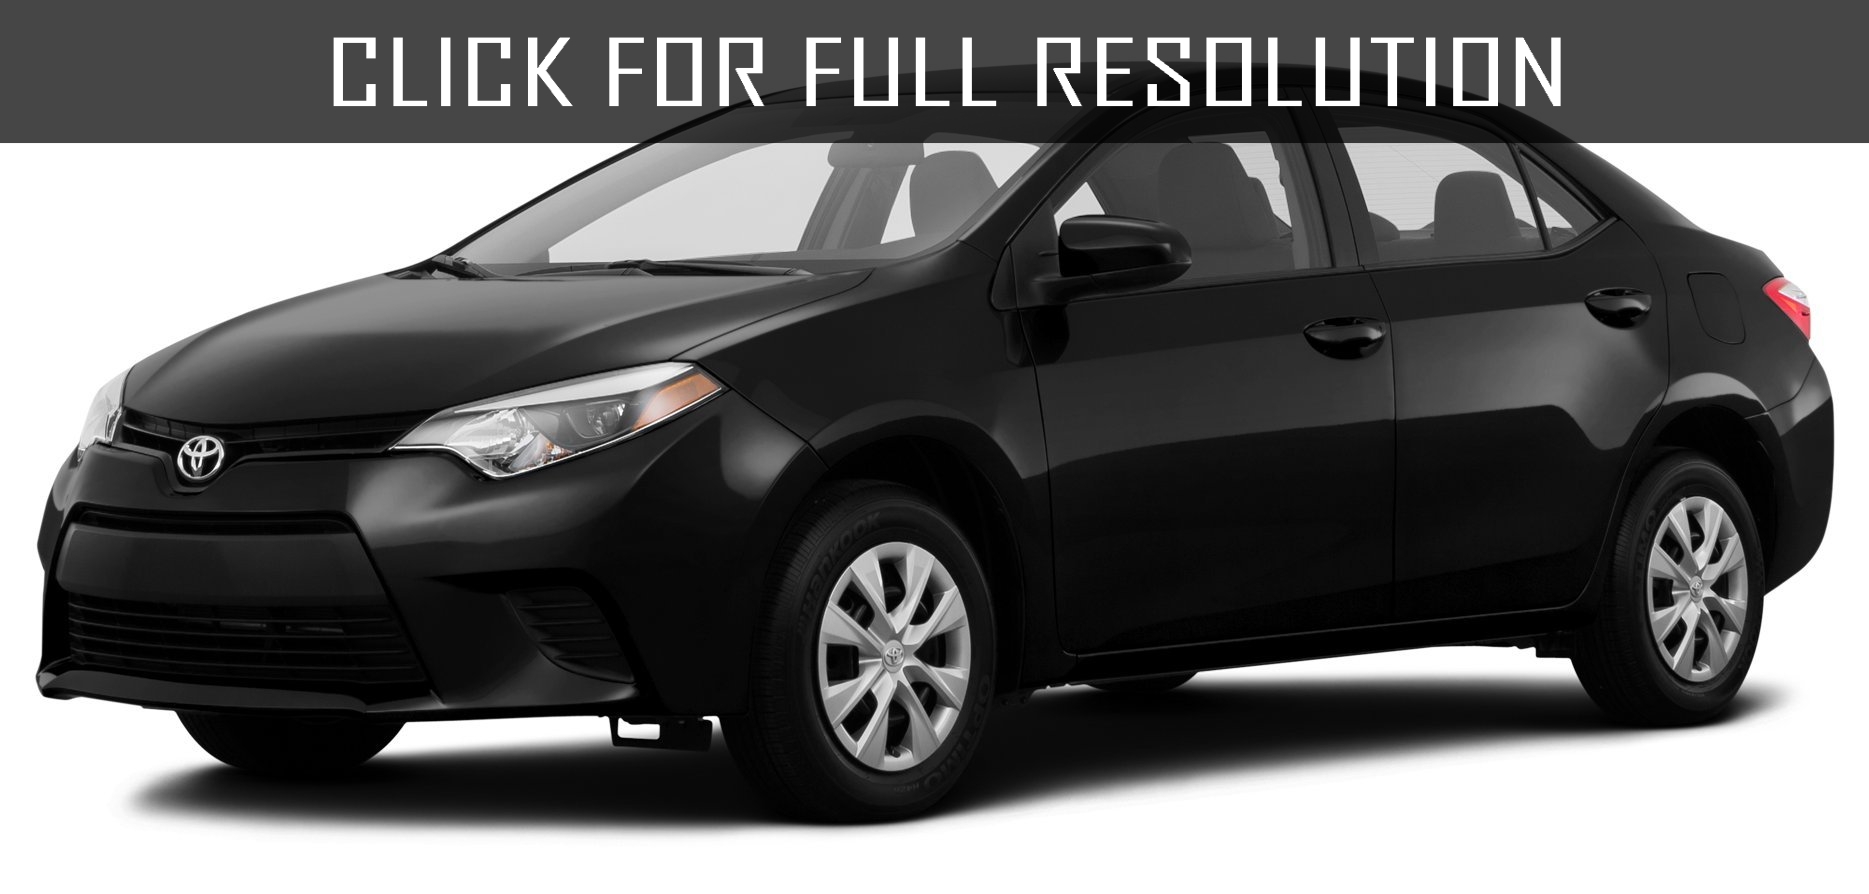 Toyota Corolla Black amazing photo gallery, some information and